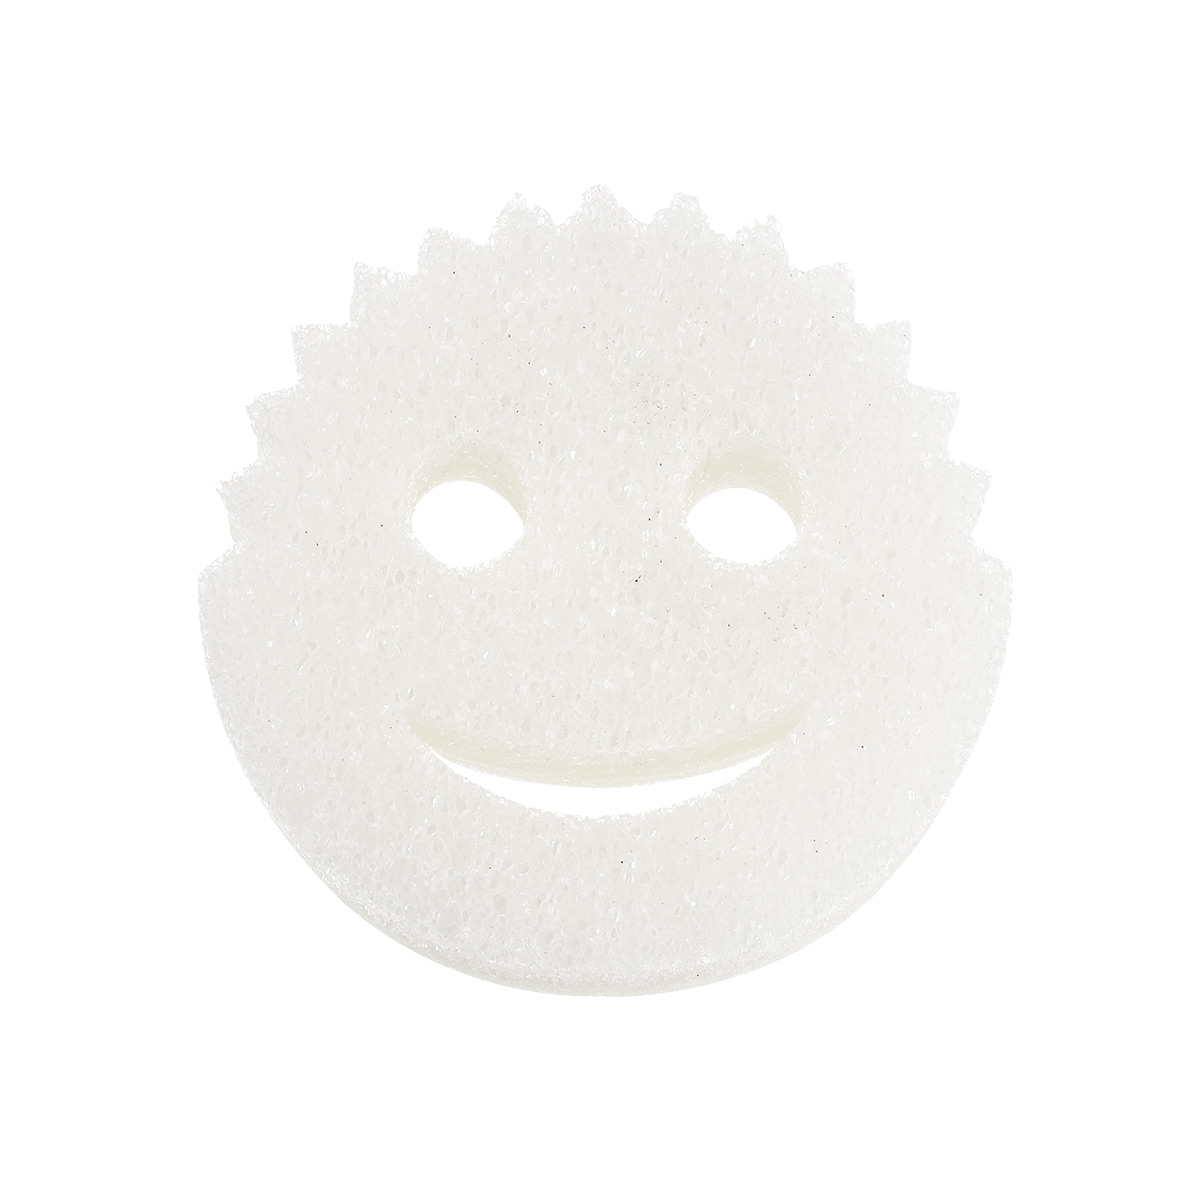 https://www.containerstore.com/catalogimages/392944/10082166-Scrub-Daddy-dye-free.jpg